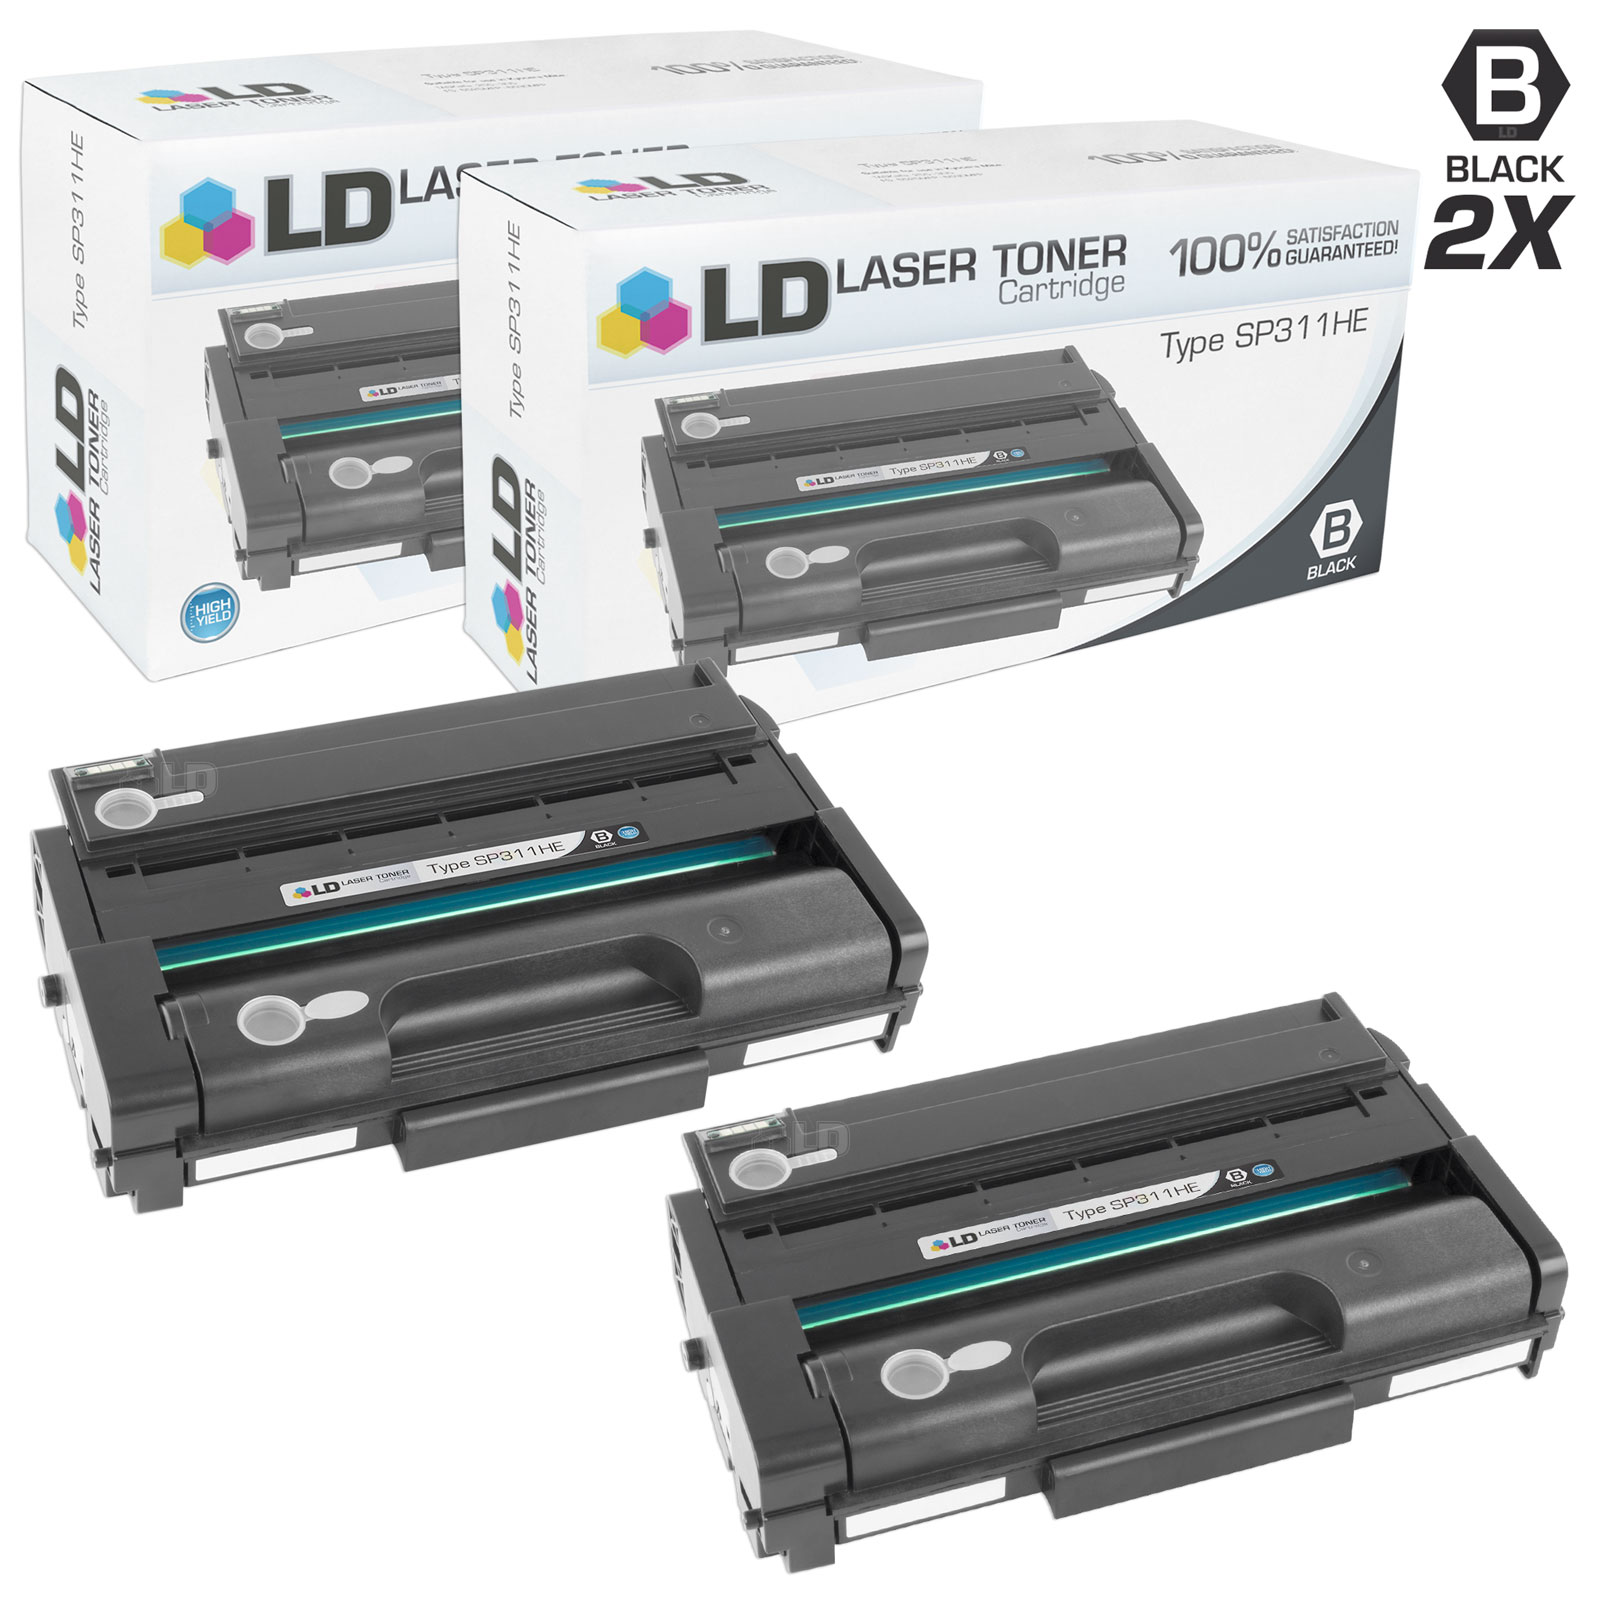 LD Compatible Replacement for Ricoh 407245 High Yield Black Toner Cartridge 2-Pack for SP 311DNw, SP 311SFNw, SP 325 DNw, SP 325 SFNw, SP 325DNw, SP 325SFNw - image 1 of 7